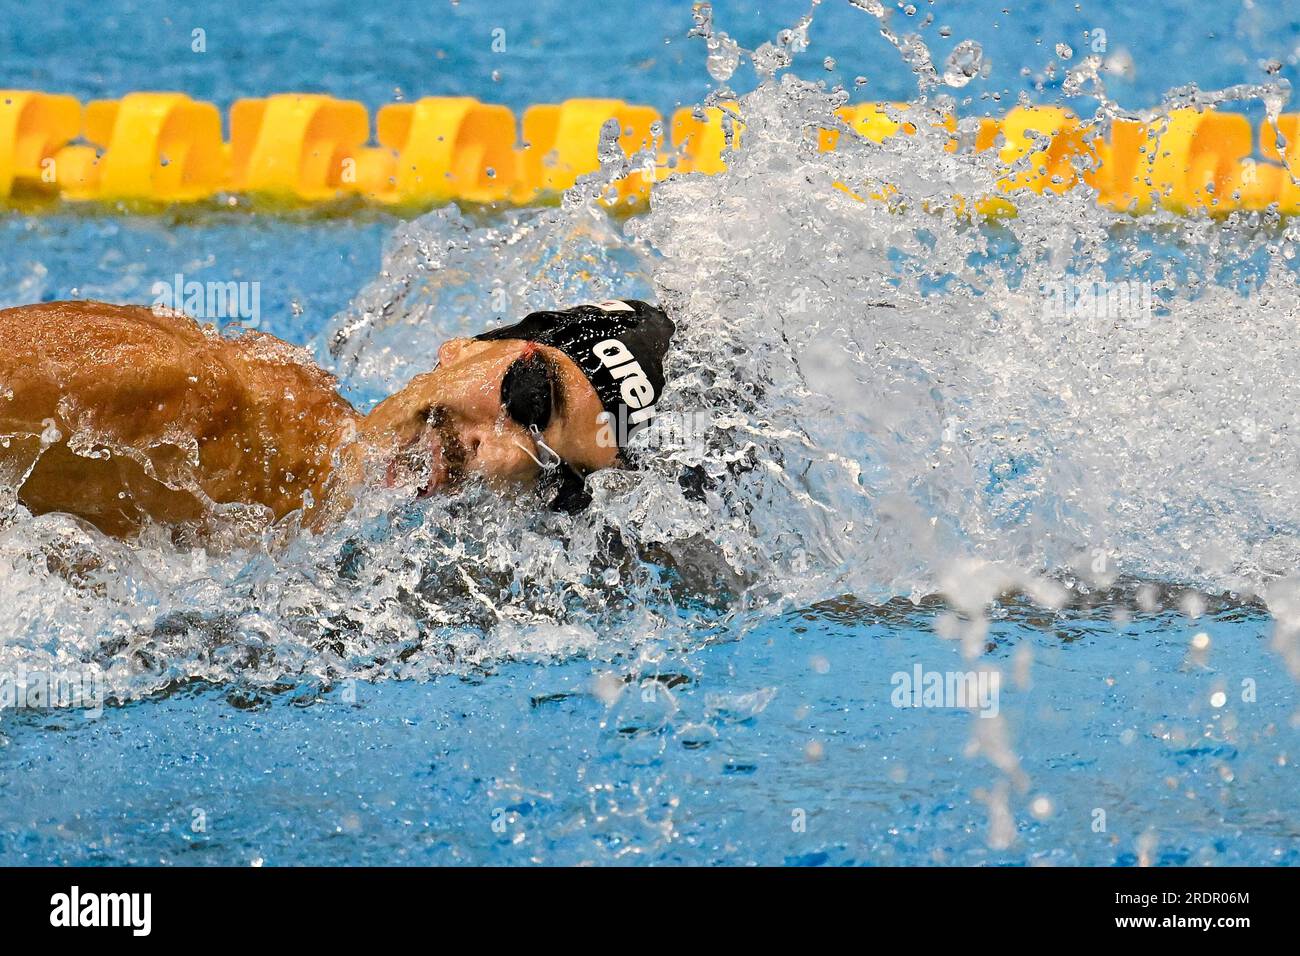 Fukuoka, Japan. 23rd July, 2023. Manuel Frigo of Italy competes in the Men's 4x100 Freestyle relay preliminary during the 20th World Aquatics Championships at the Marine Messe Hall A in Fukuoka (Japan), July 23rd, 2023. Italy placed 3rd. Credit: Insidefoto di andrea staccioli/Alamy Live News Stock Photo